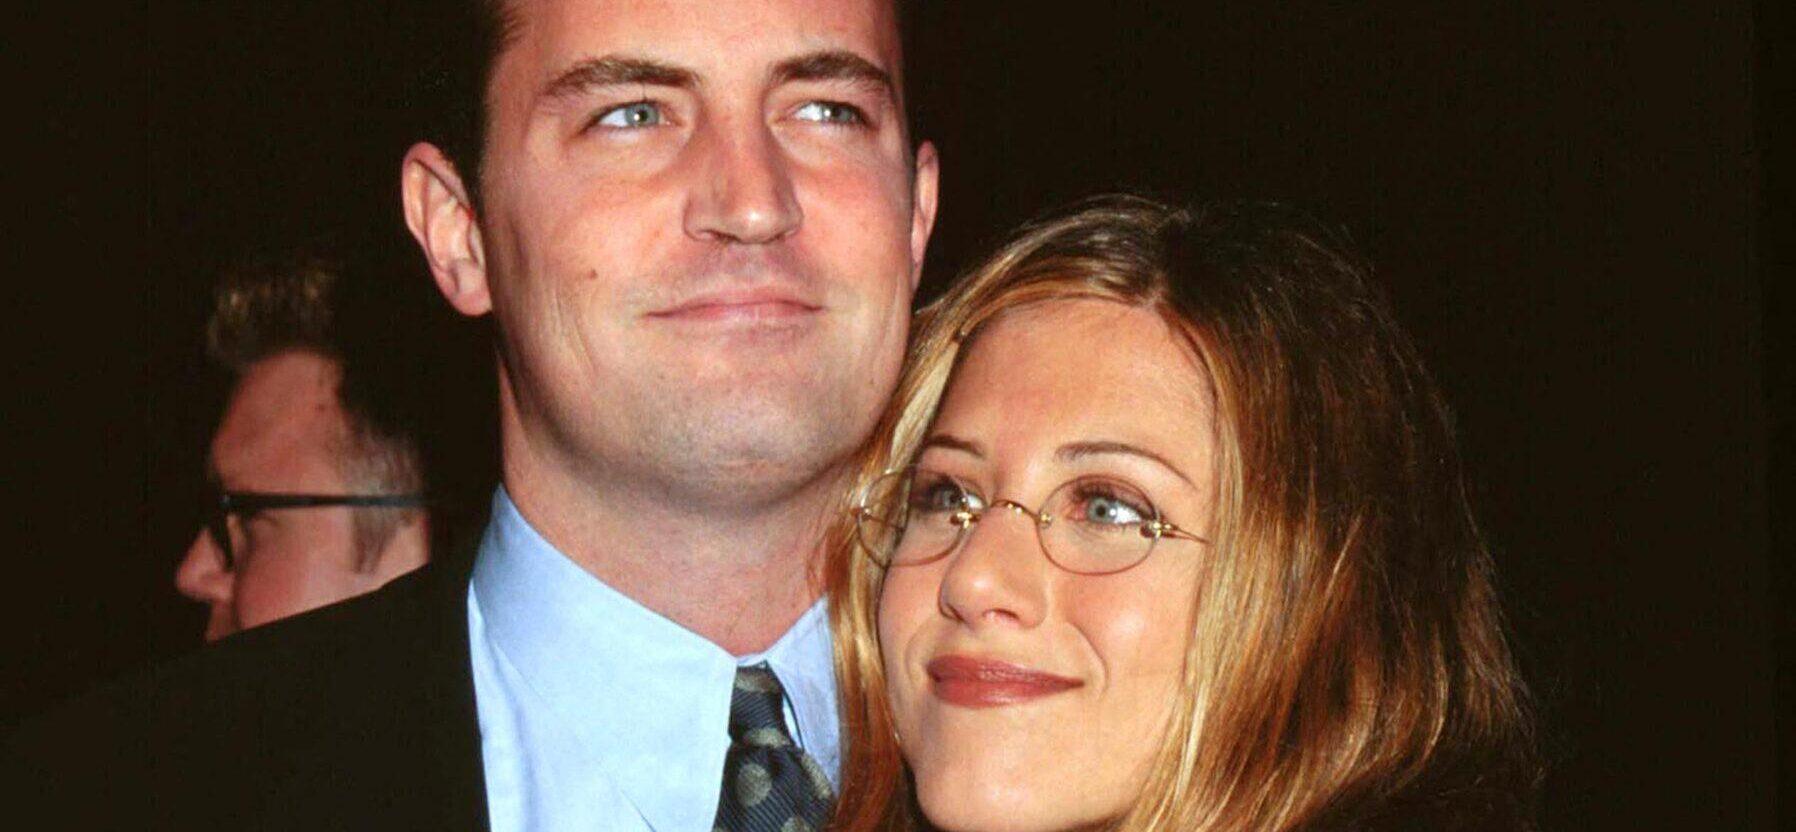 Jennifer Aniston Texting With Matthew Perry The Day He Died: ‘He Wasn’t Struggling’